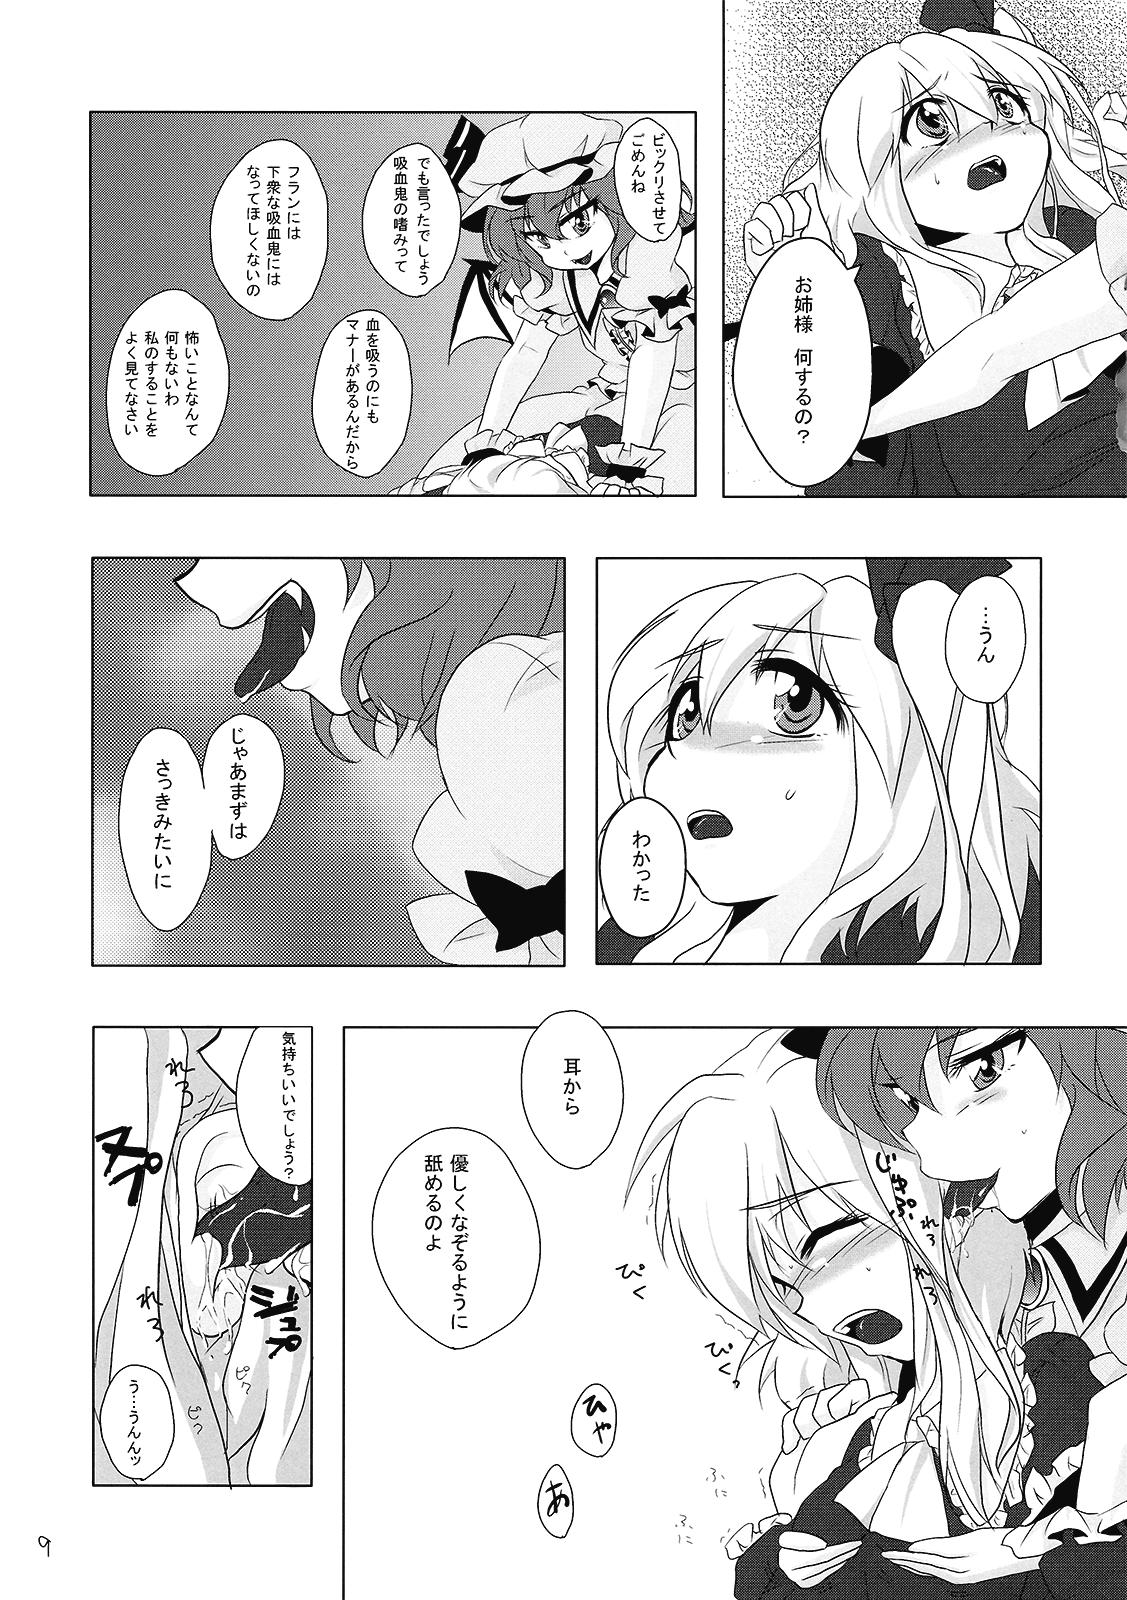 Girlongirl 吸血鬼のすゝめ - Touhou project Horny - Page 11